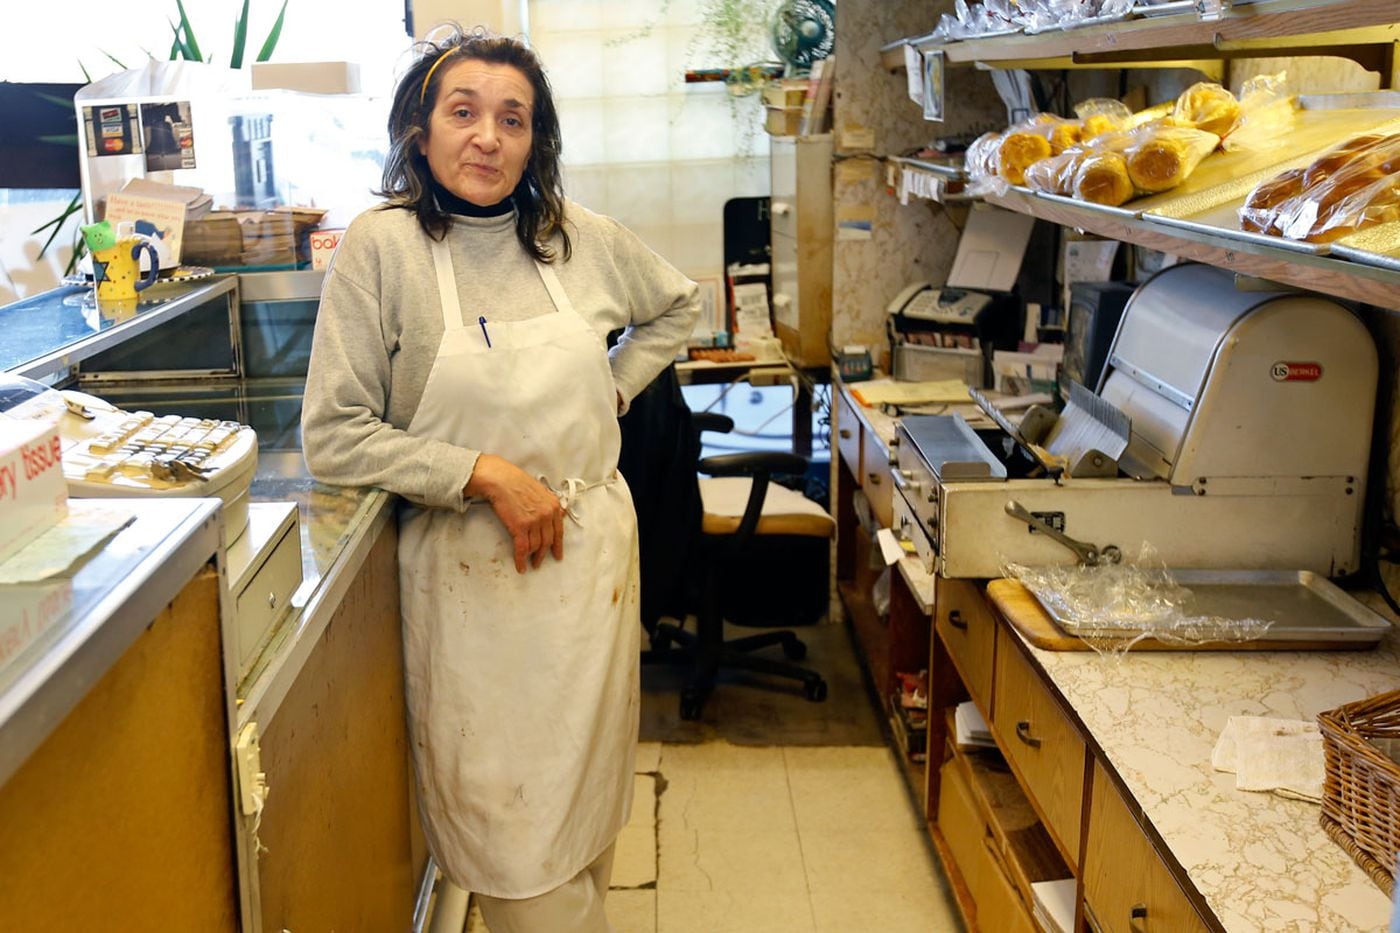 Zivka Djordjevich, owner of Best Cake Kosher Bakery in Overbrook Park, was shot in the throat by two robbers in August 2015.